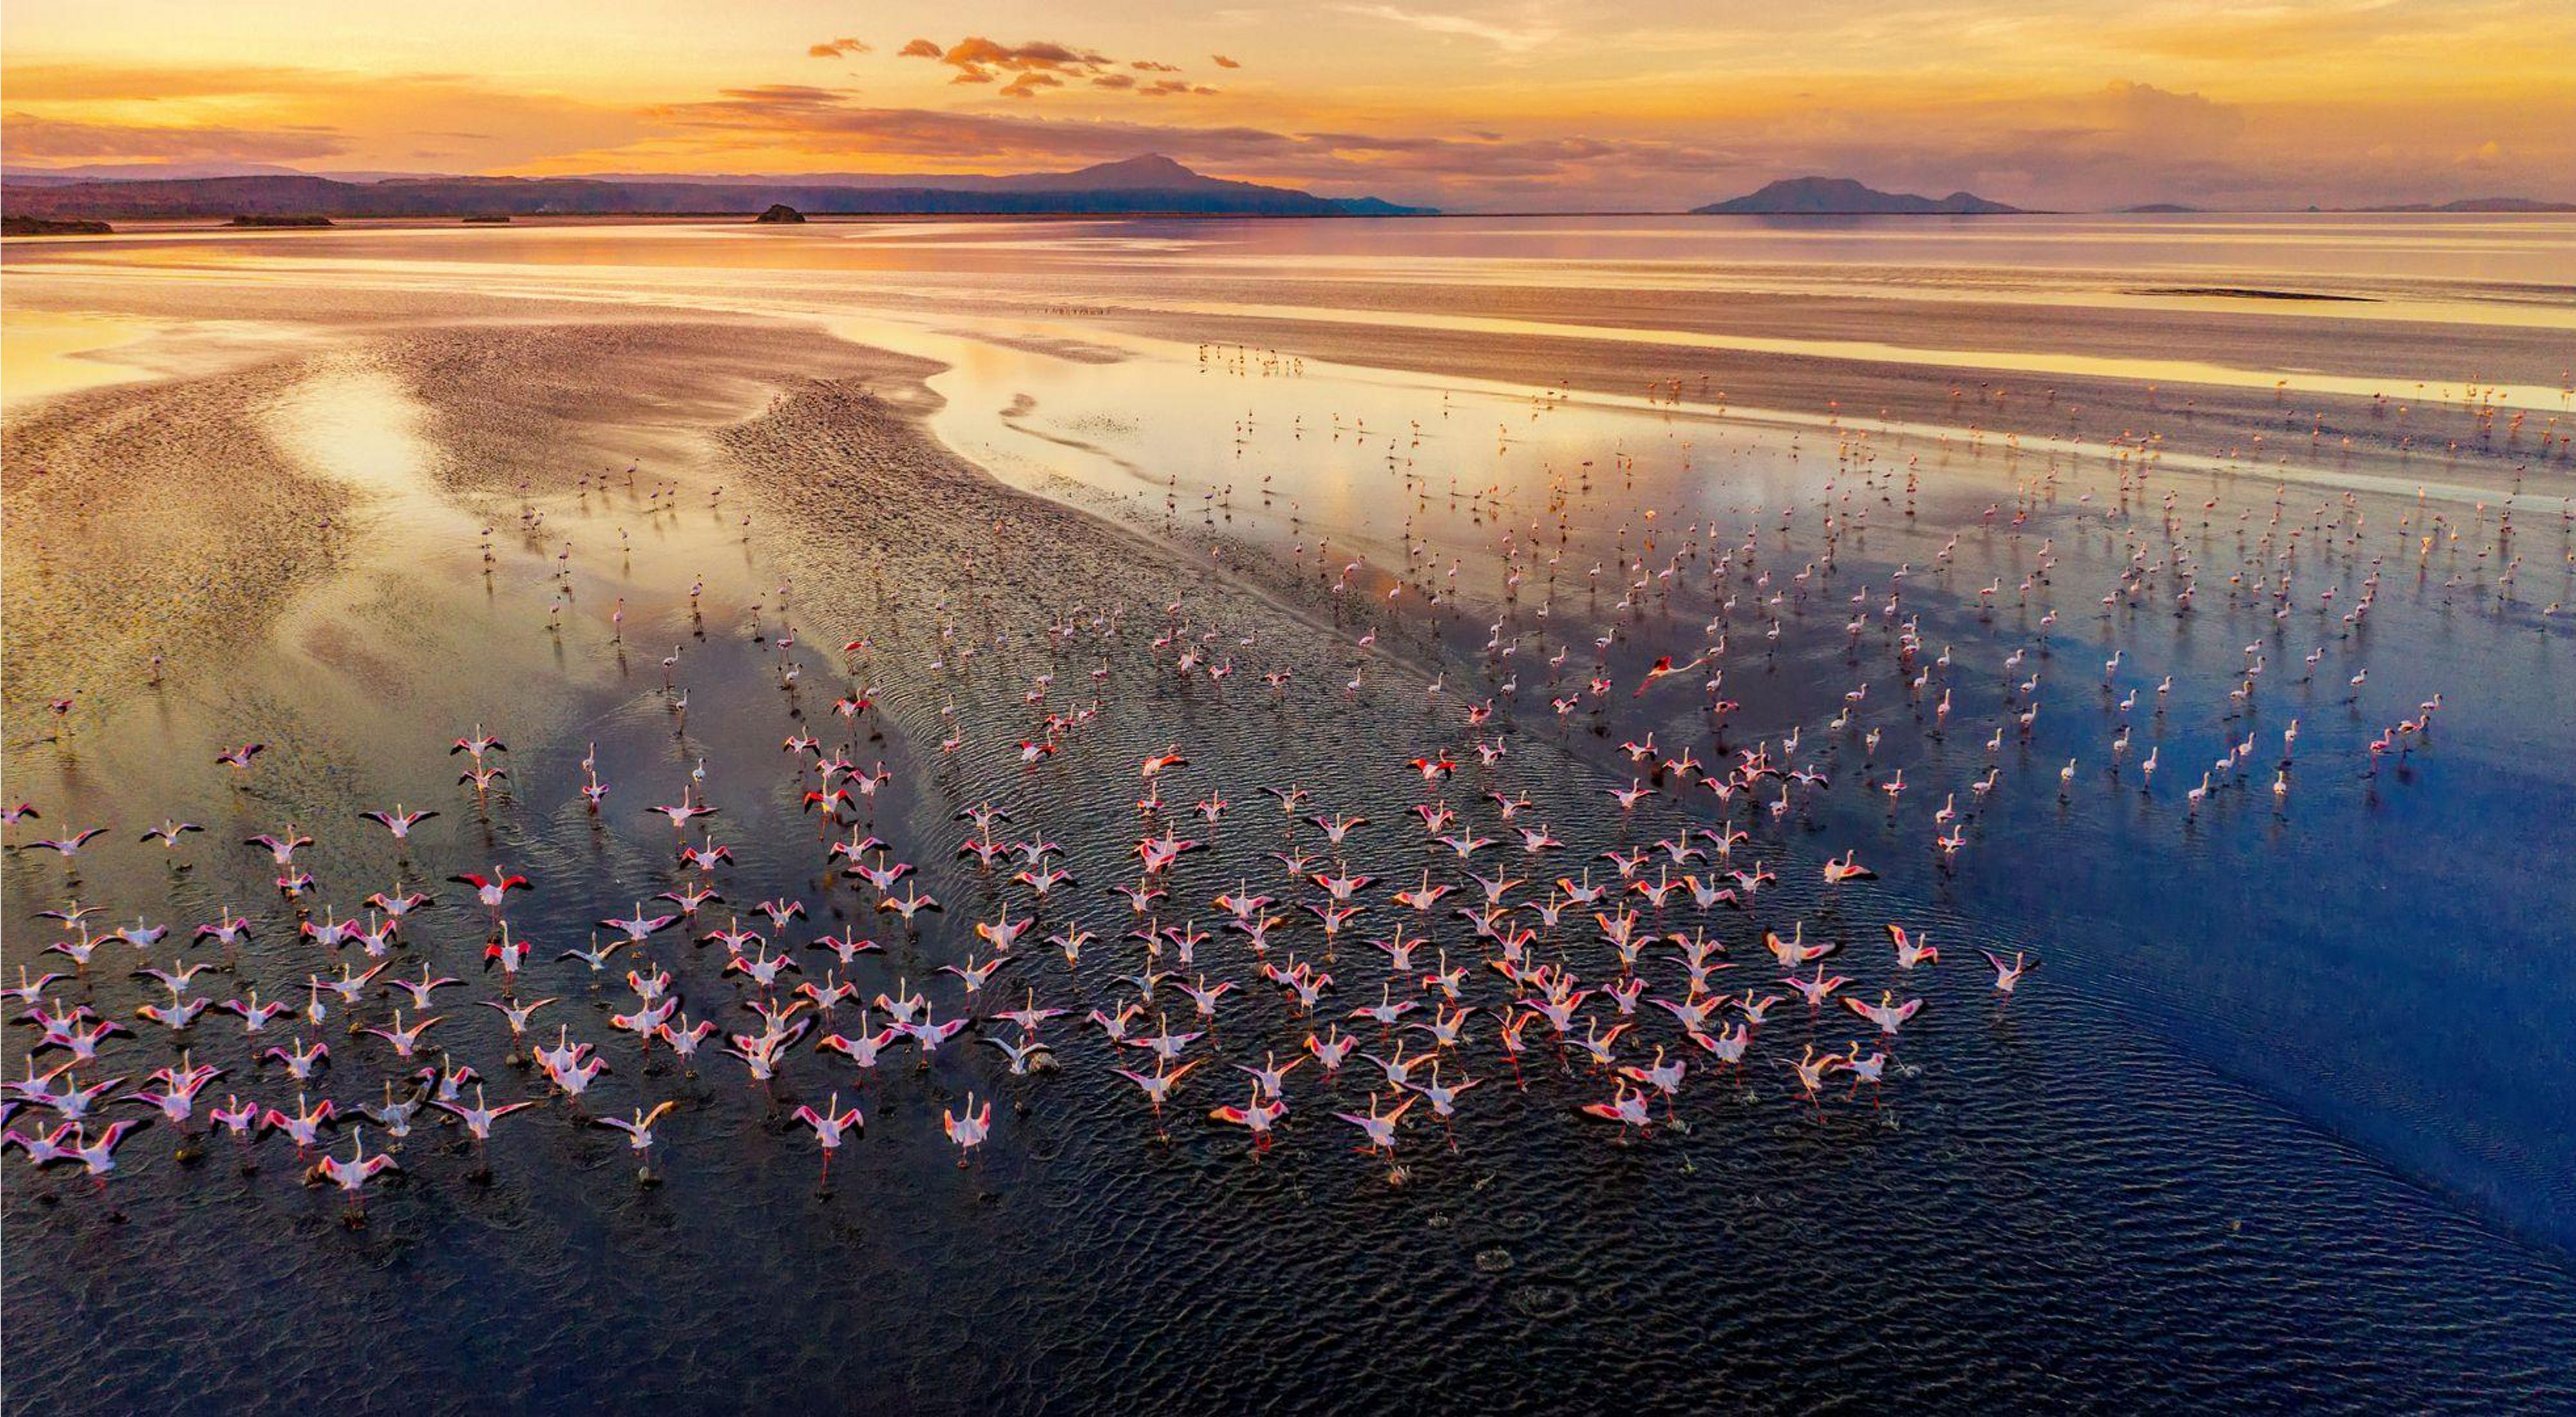 A group of flamingos flies over a lake at sunrise.